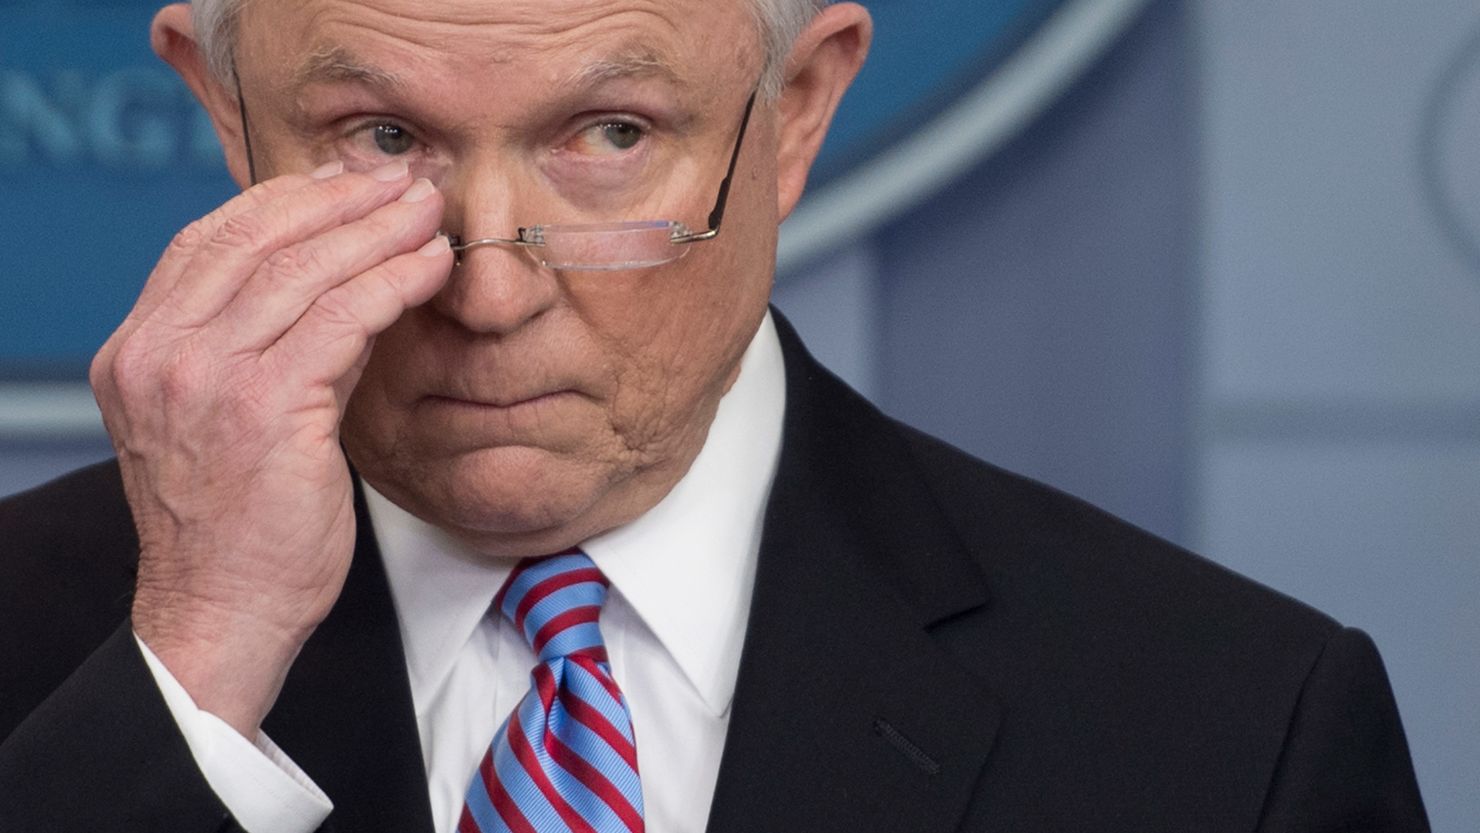 Attorney General Jeff Sessions speaks during a White House daily briefing on March 27, 2017.